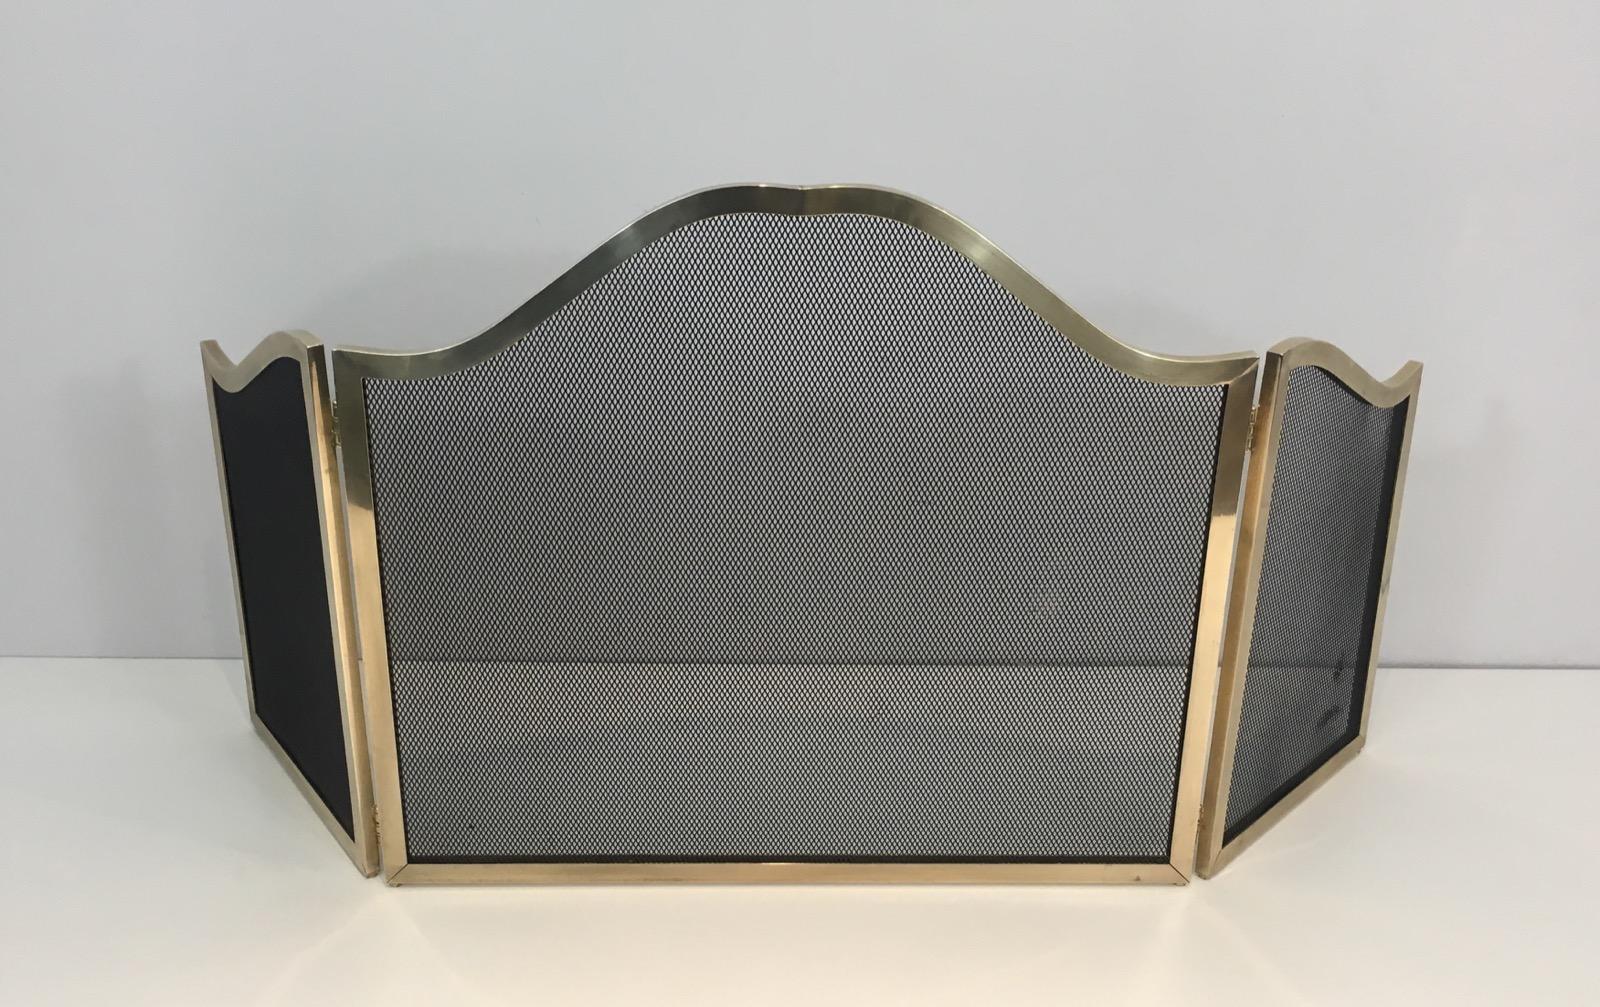 This fireplace screen is French, circa 1970. It is made of brass with metal grilling. Very elegant shape and beautiful quality.